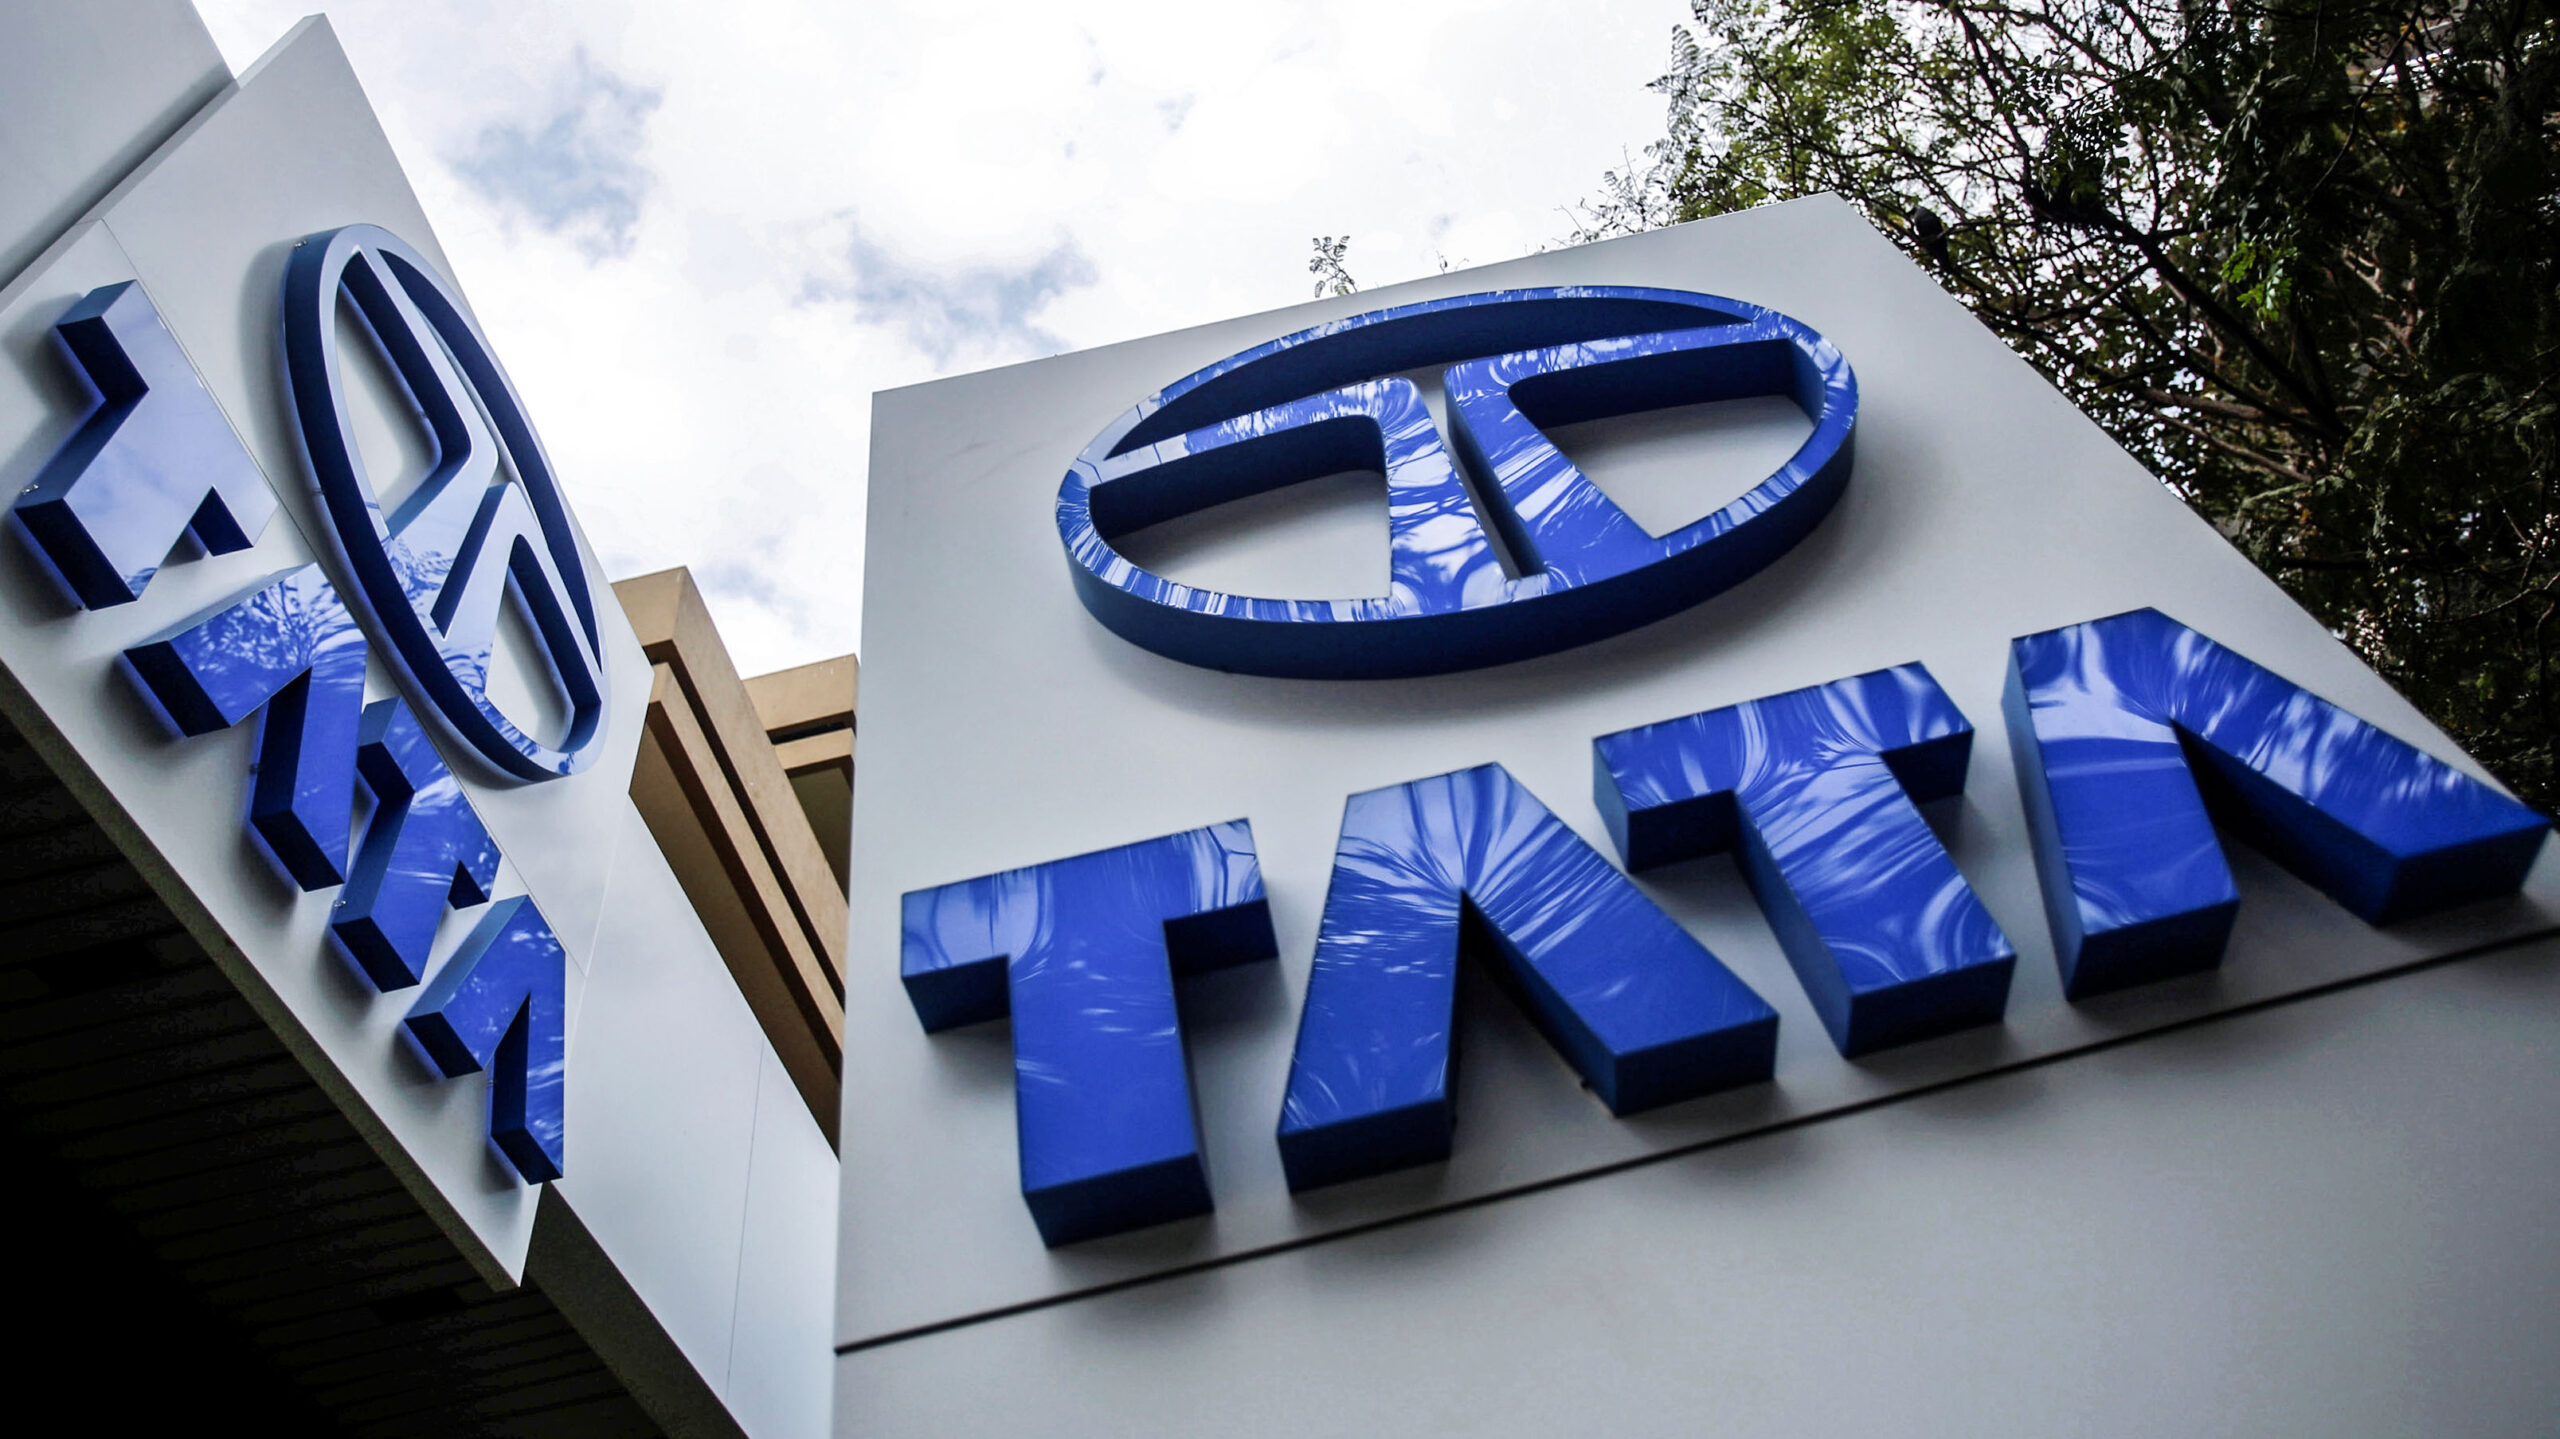 Tata Motors Share Price Today: Check Live NSE/BSE Stock Price @INDMoney